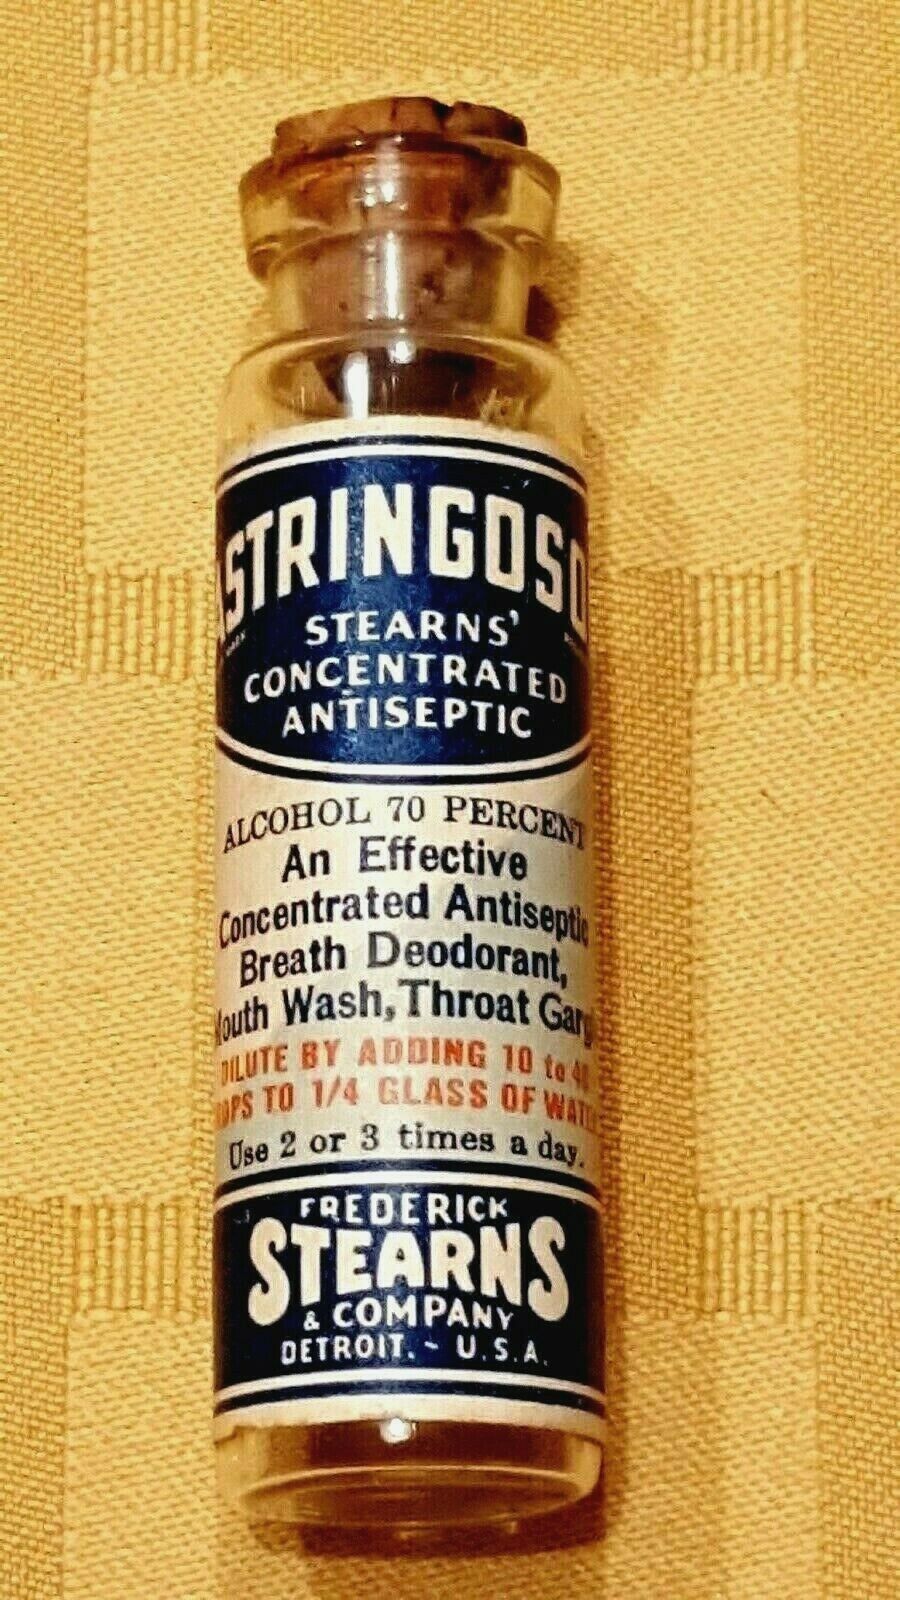 Frederick Stearns & Co. “Astringosol” Concentrated Antiseptic Glass Bottle